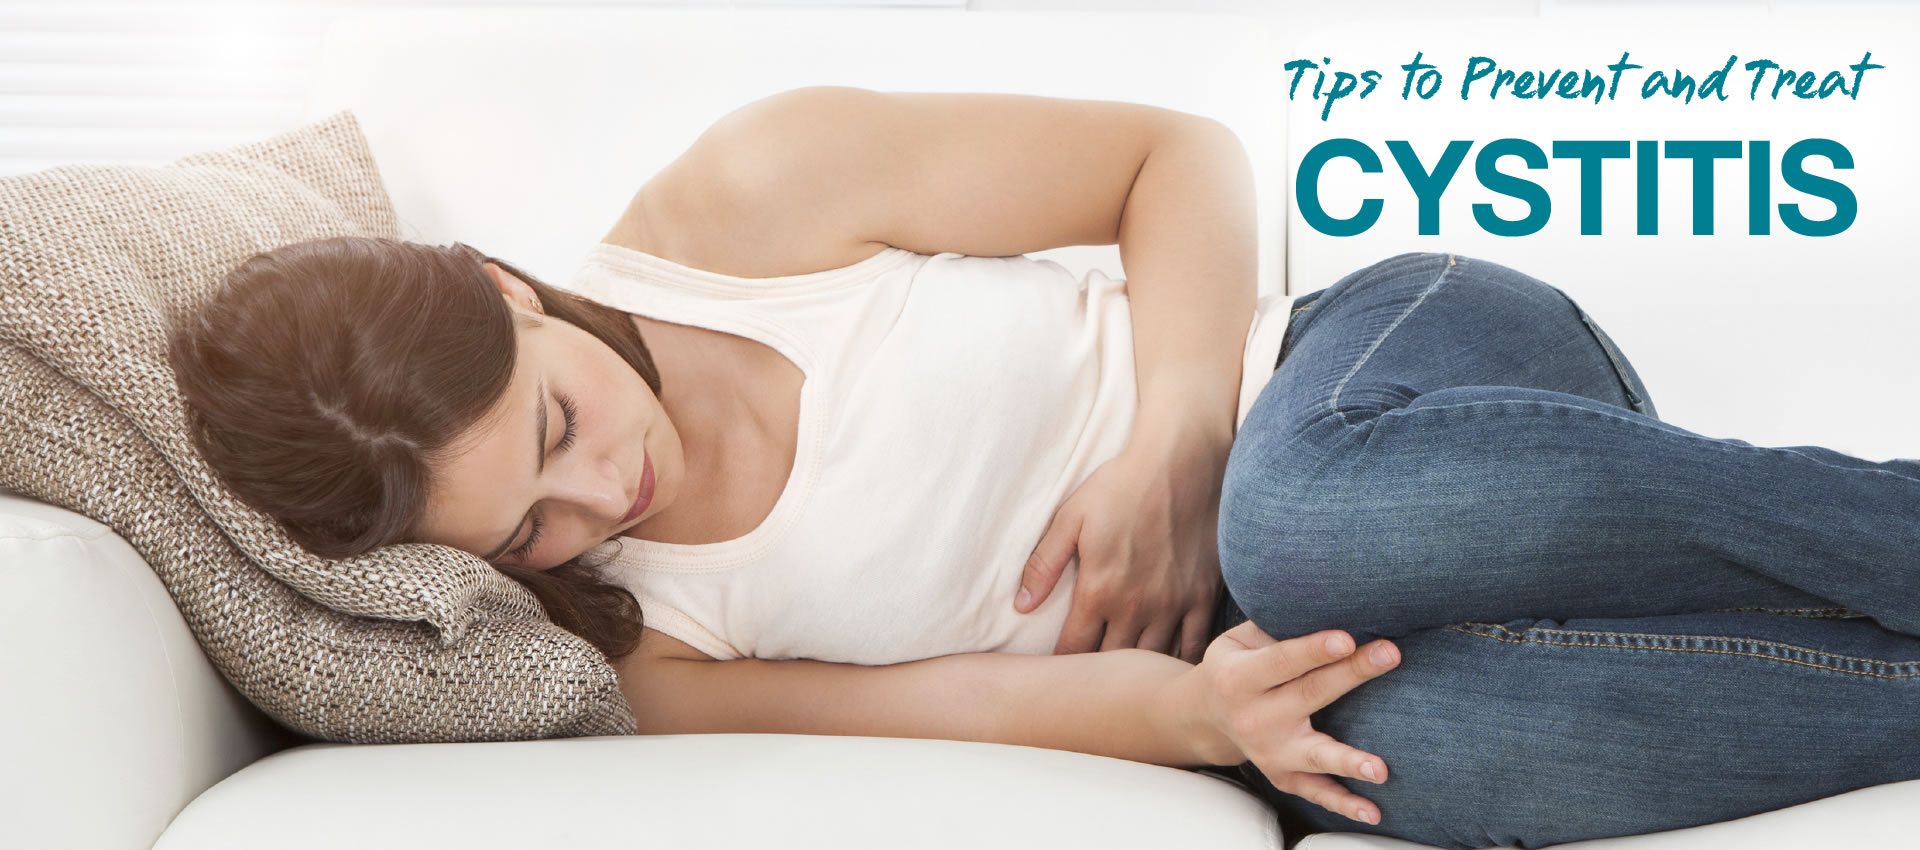 7 ways to protect cystitis